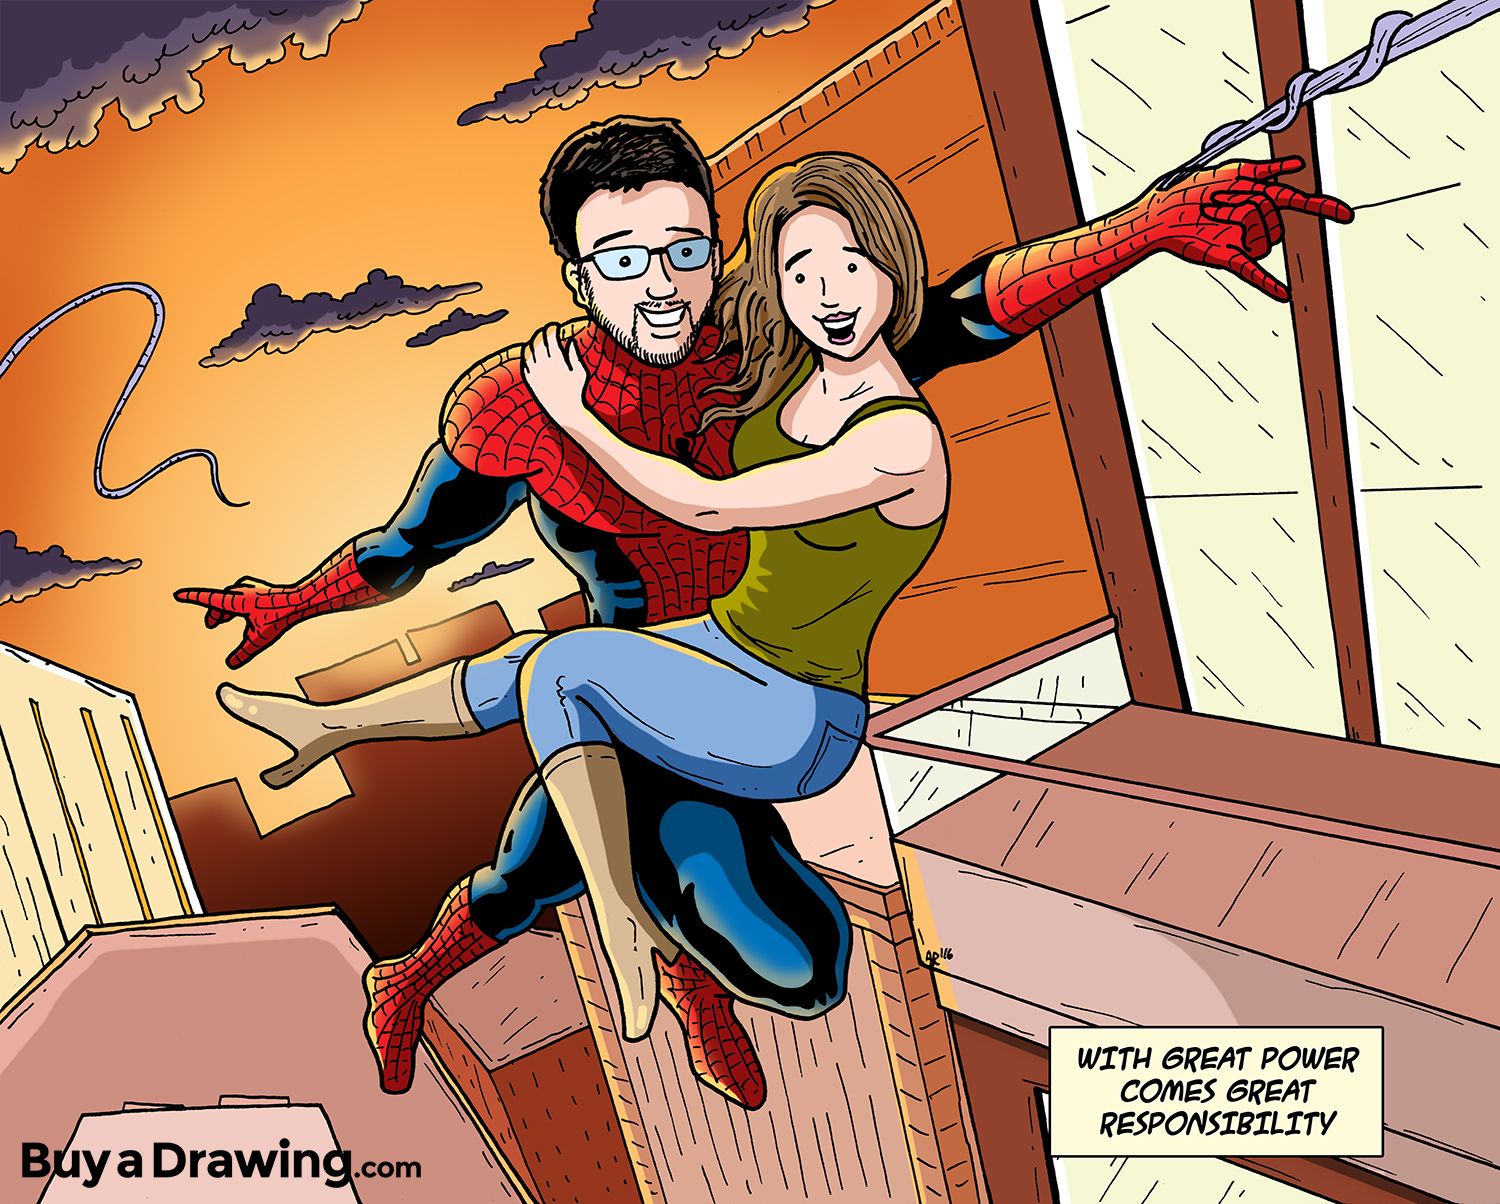 Boyfriend and Girlfriend Drawn as Spiderman and Mary Jane